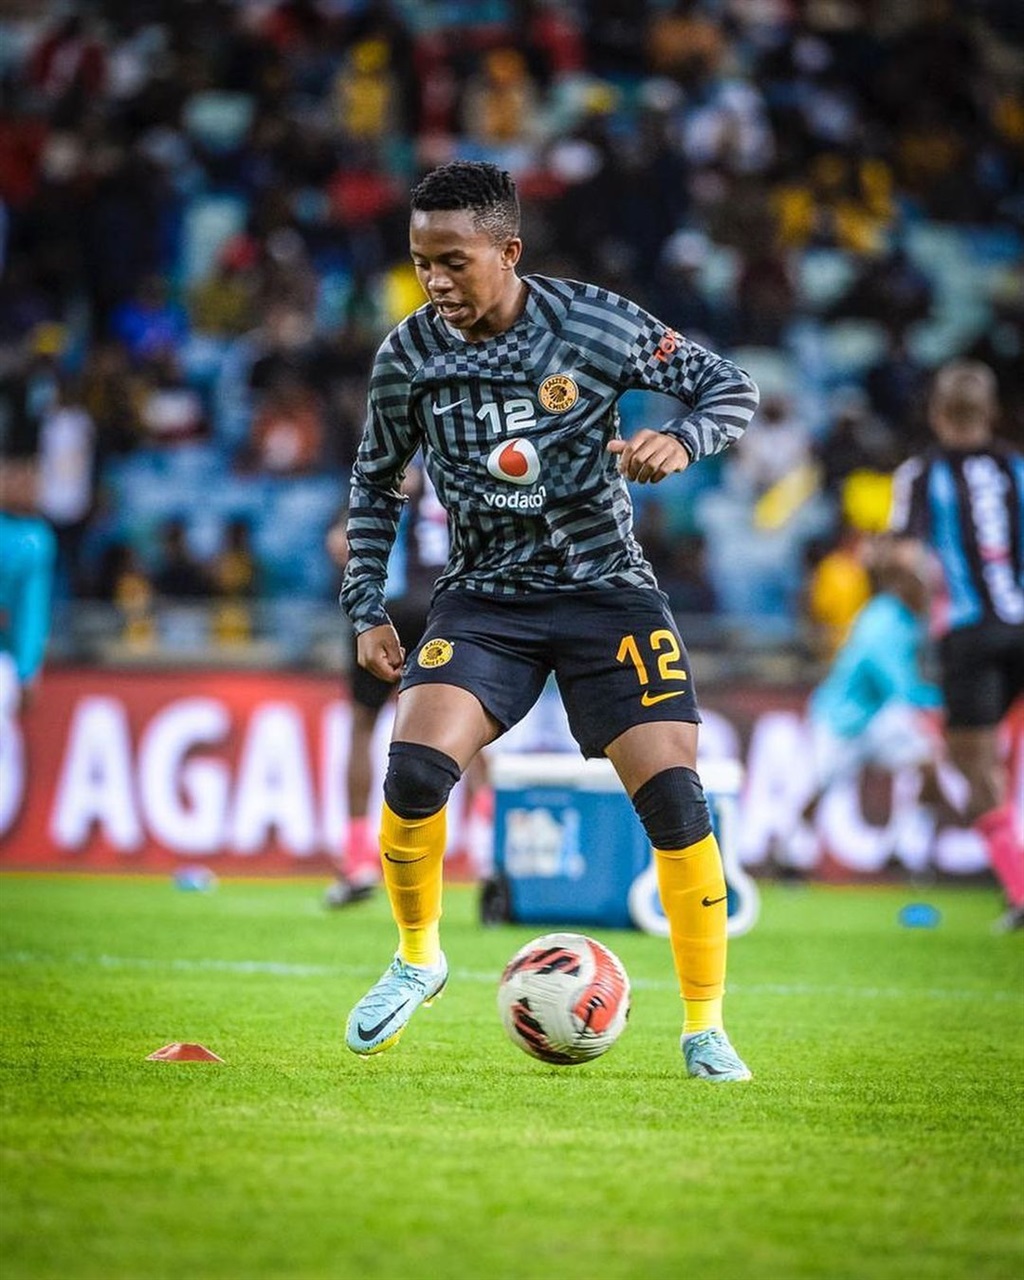 Amakhosi starlet Nkosingiphile Ngcobo is raring to go for the TTGE Virtual Chief of all Chiefs crown.